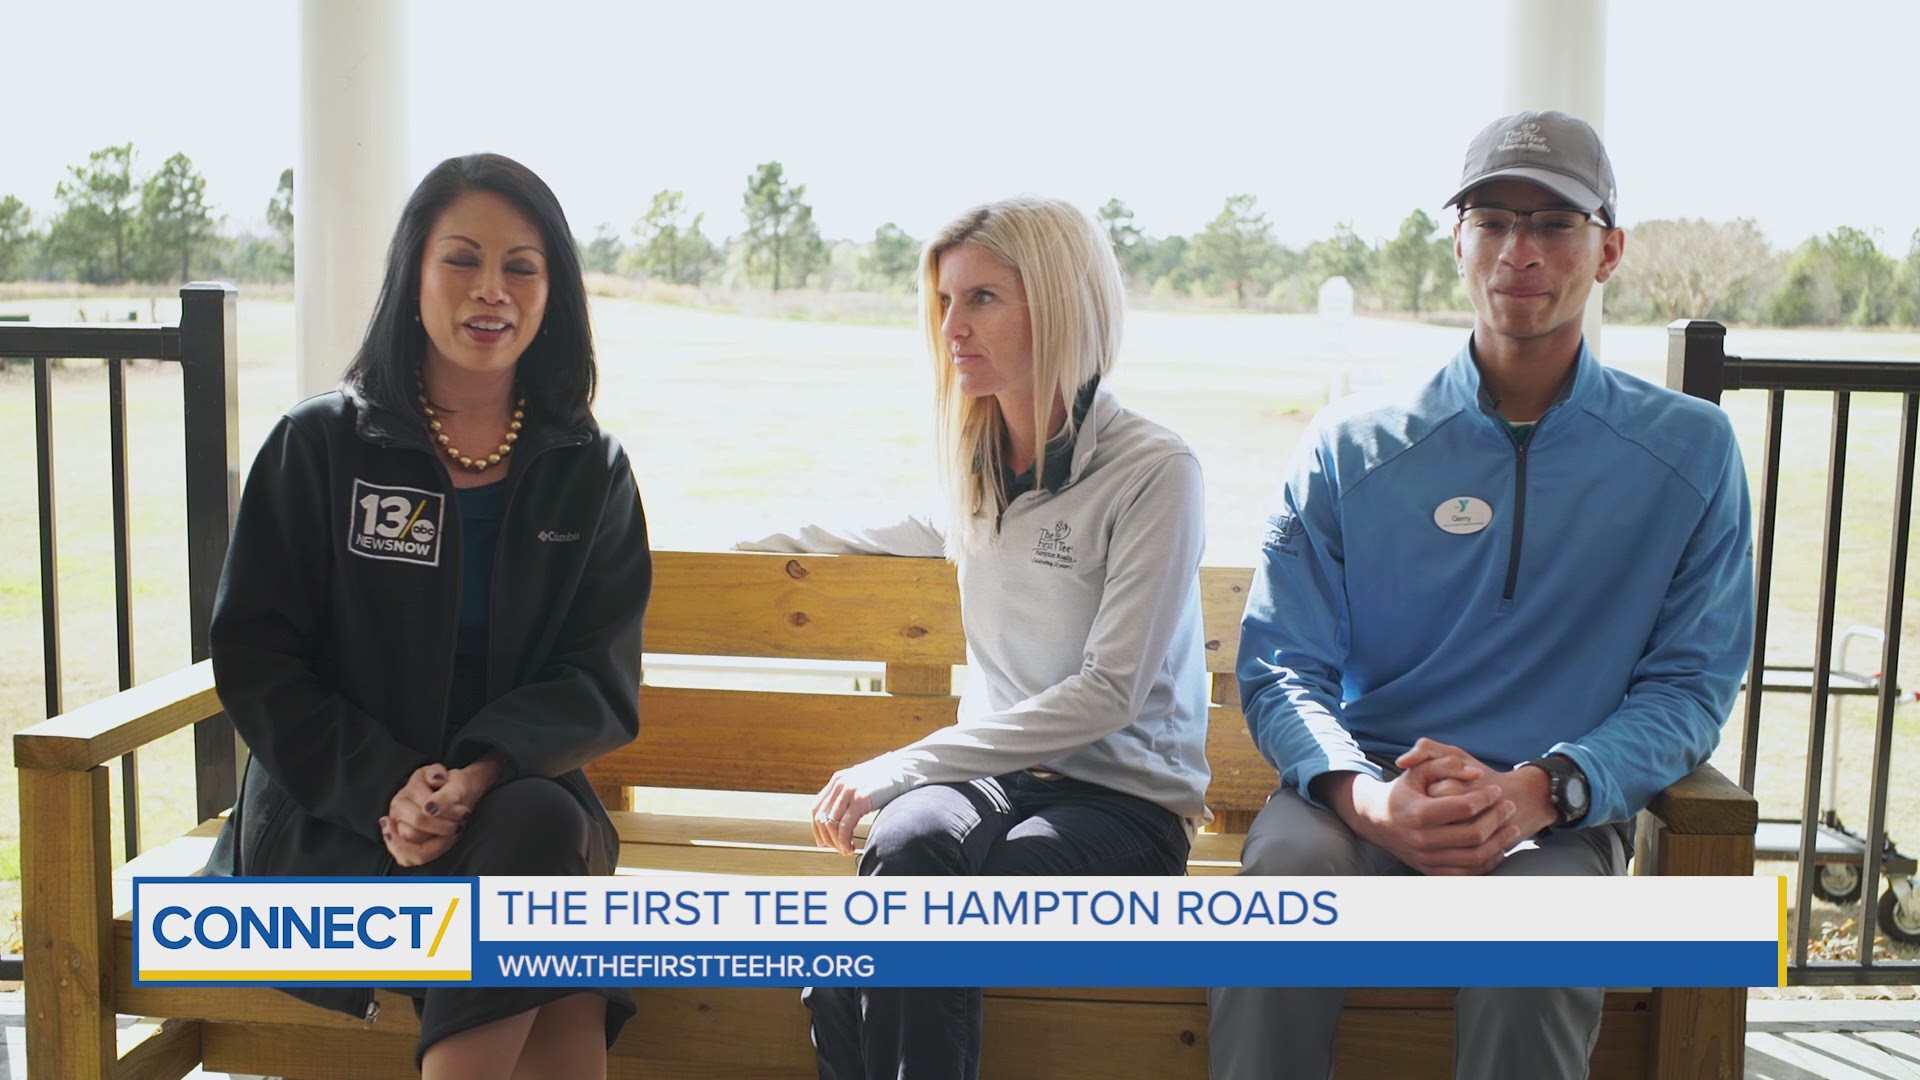 The First Tee of Hampton roads told us about their summer golf camp for youth.